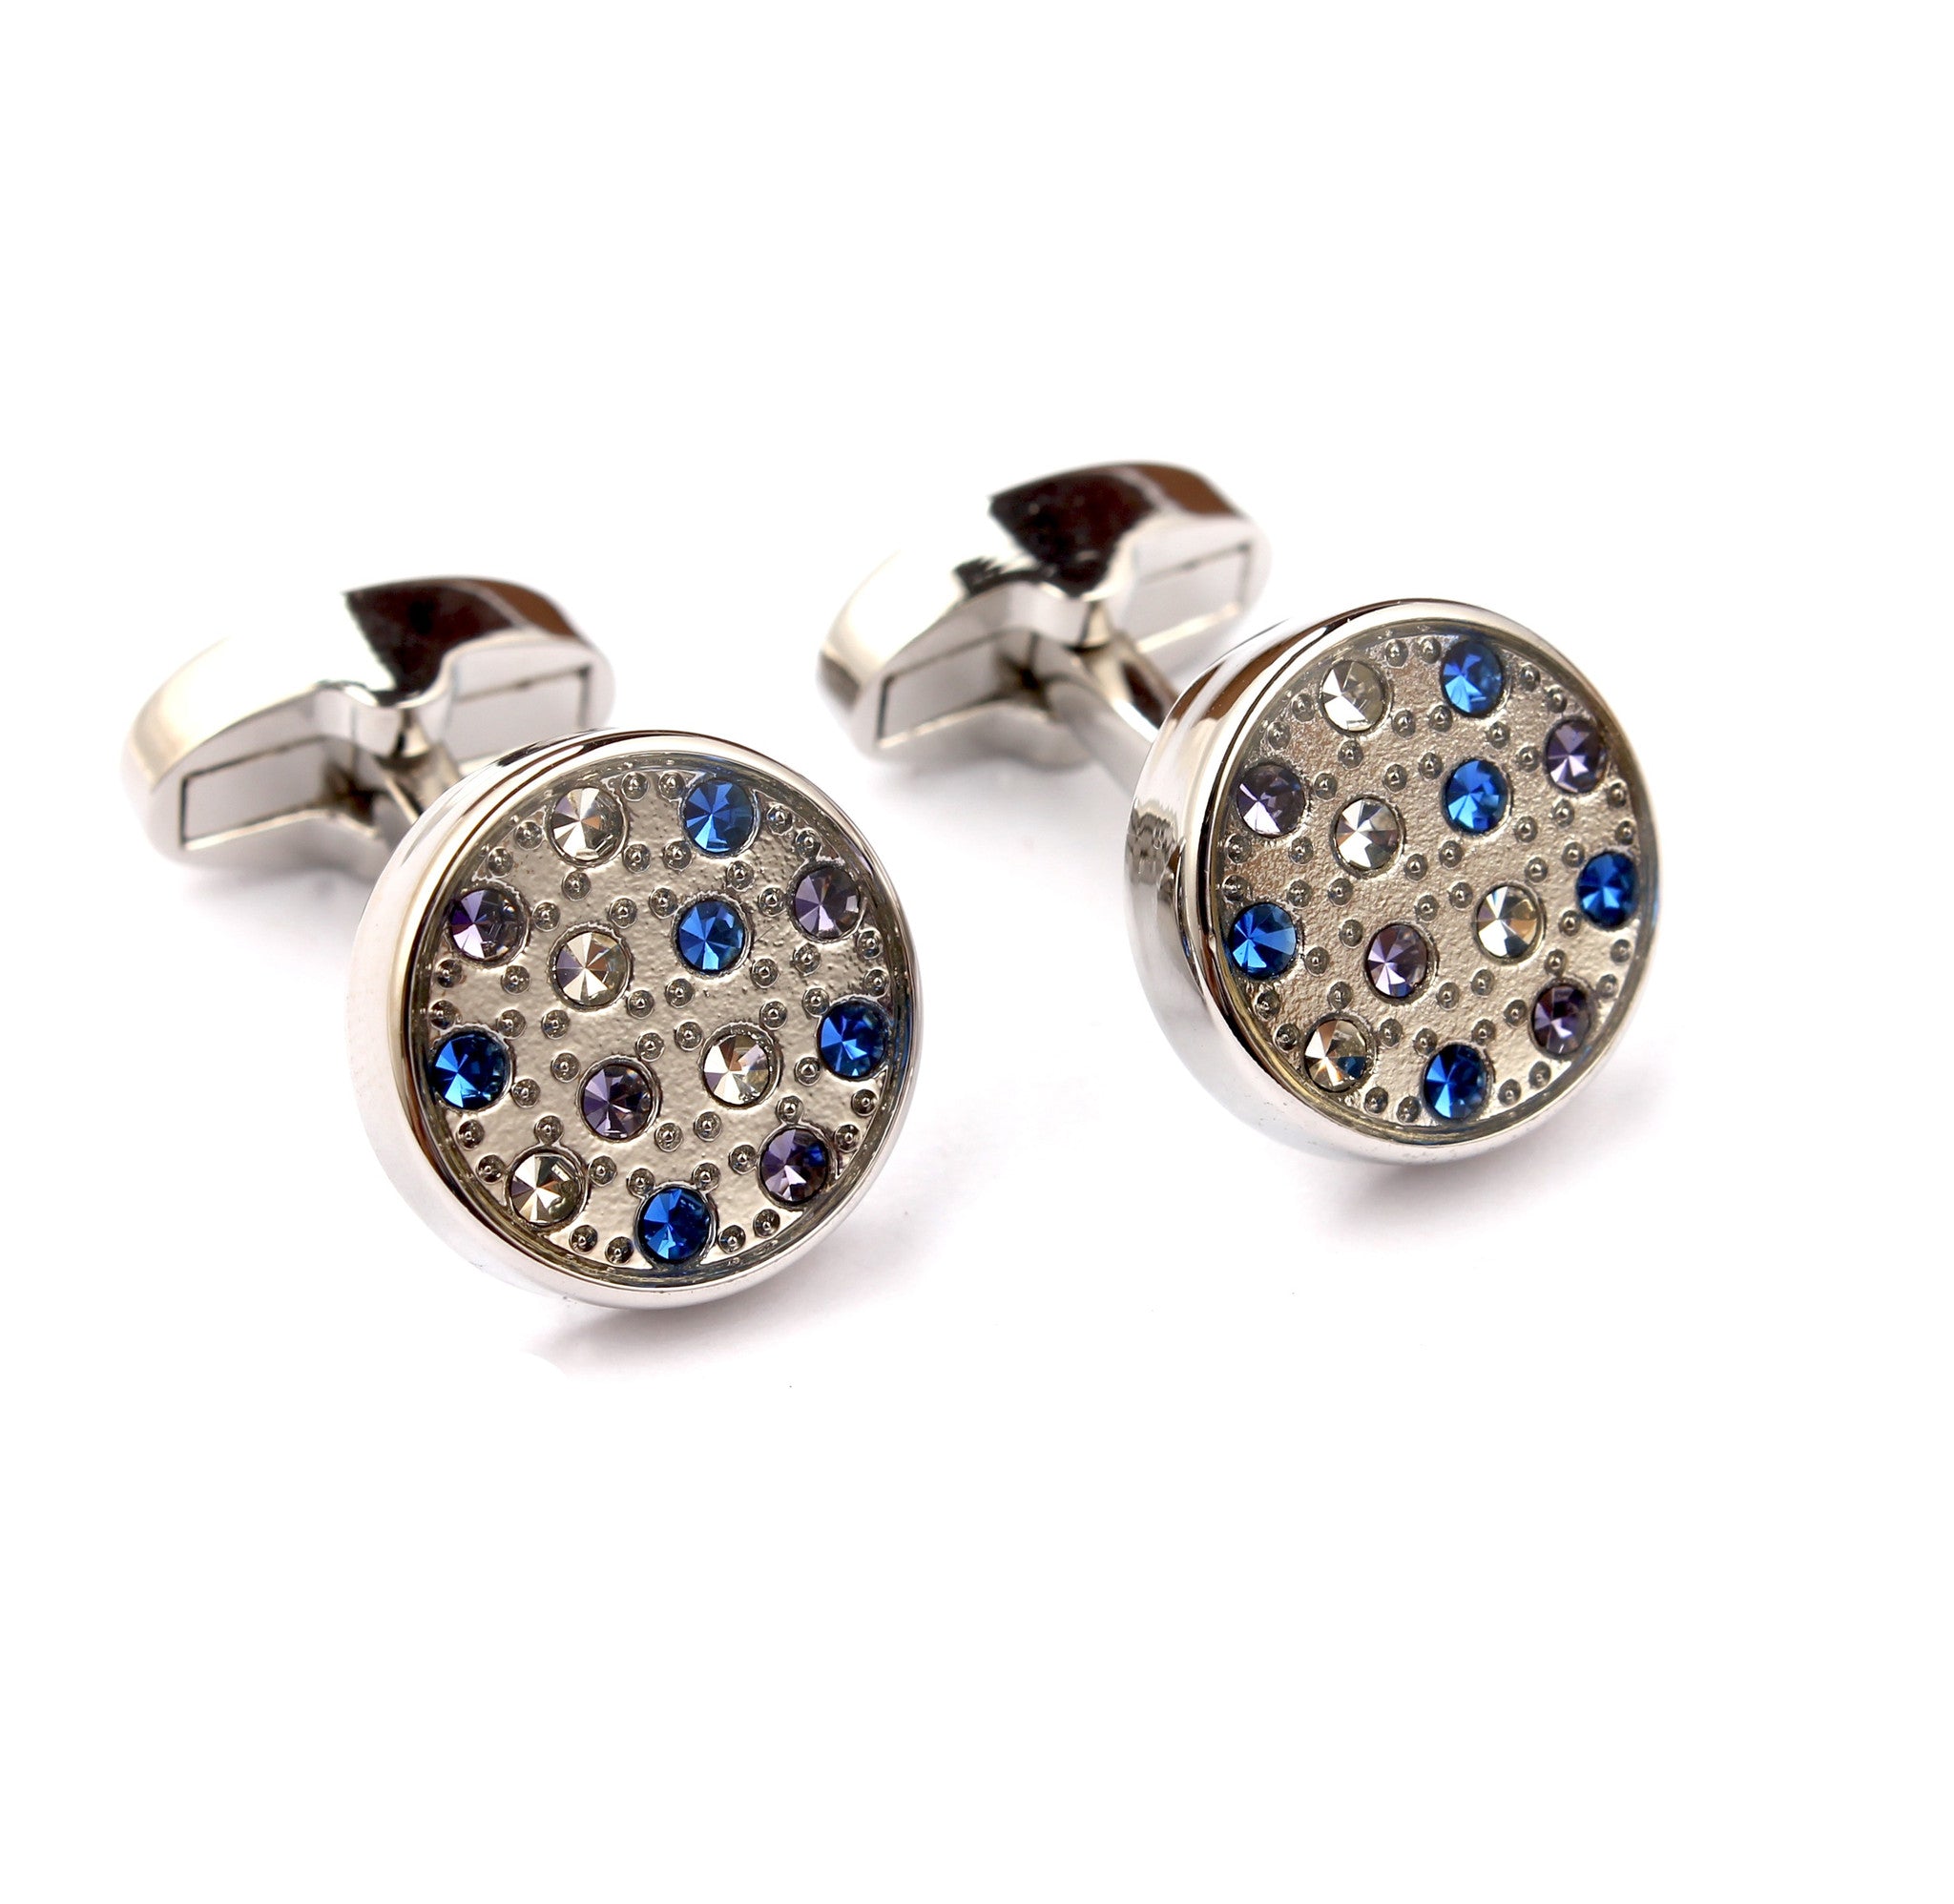 The Moroccan Blue Cufflinks Double Front Side